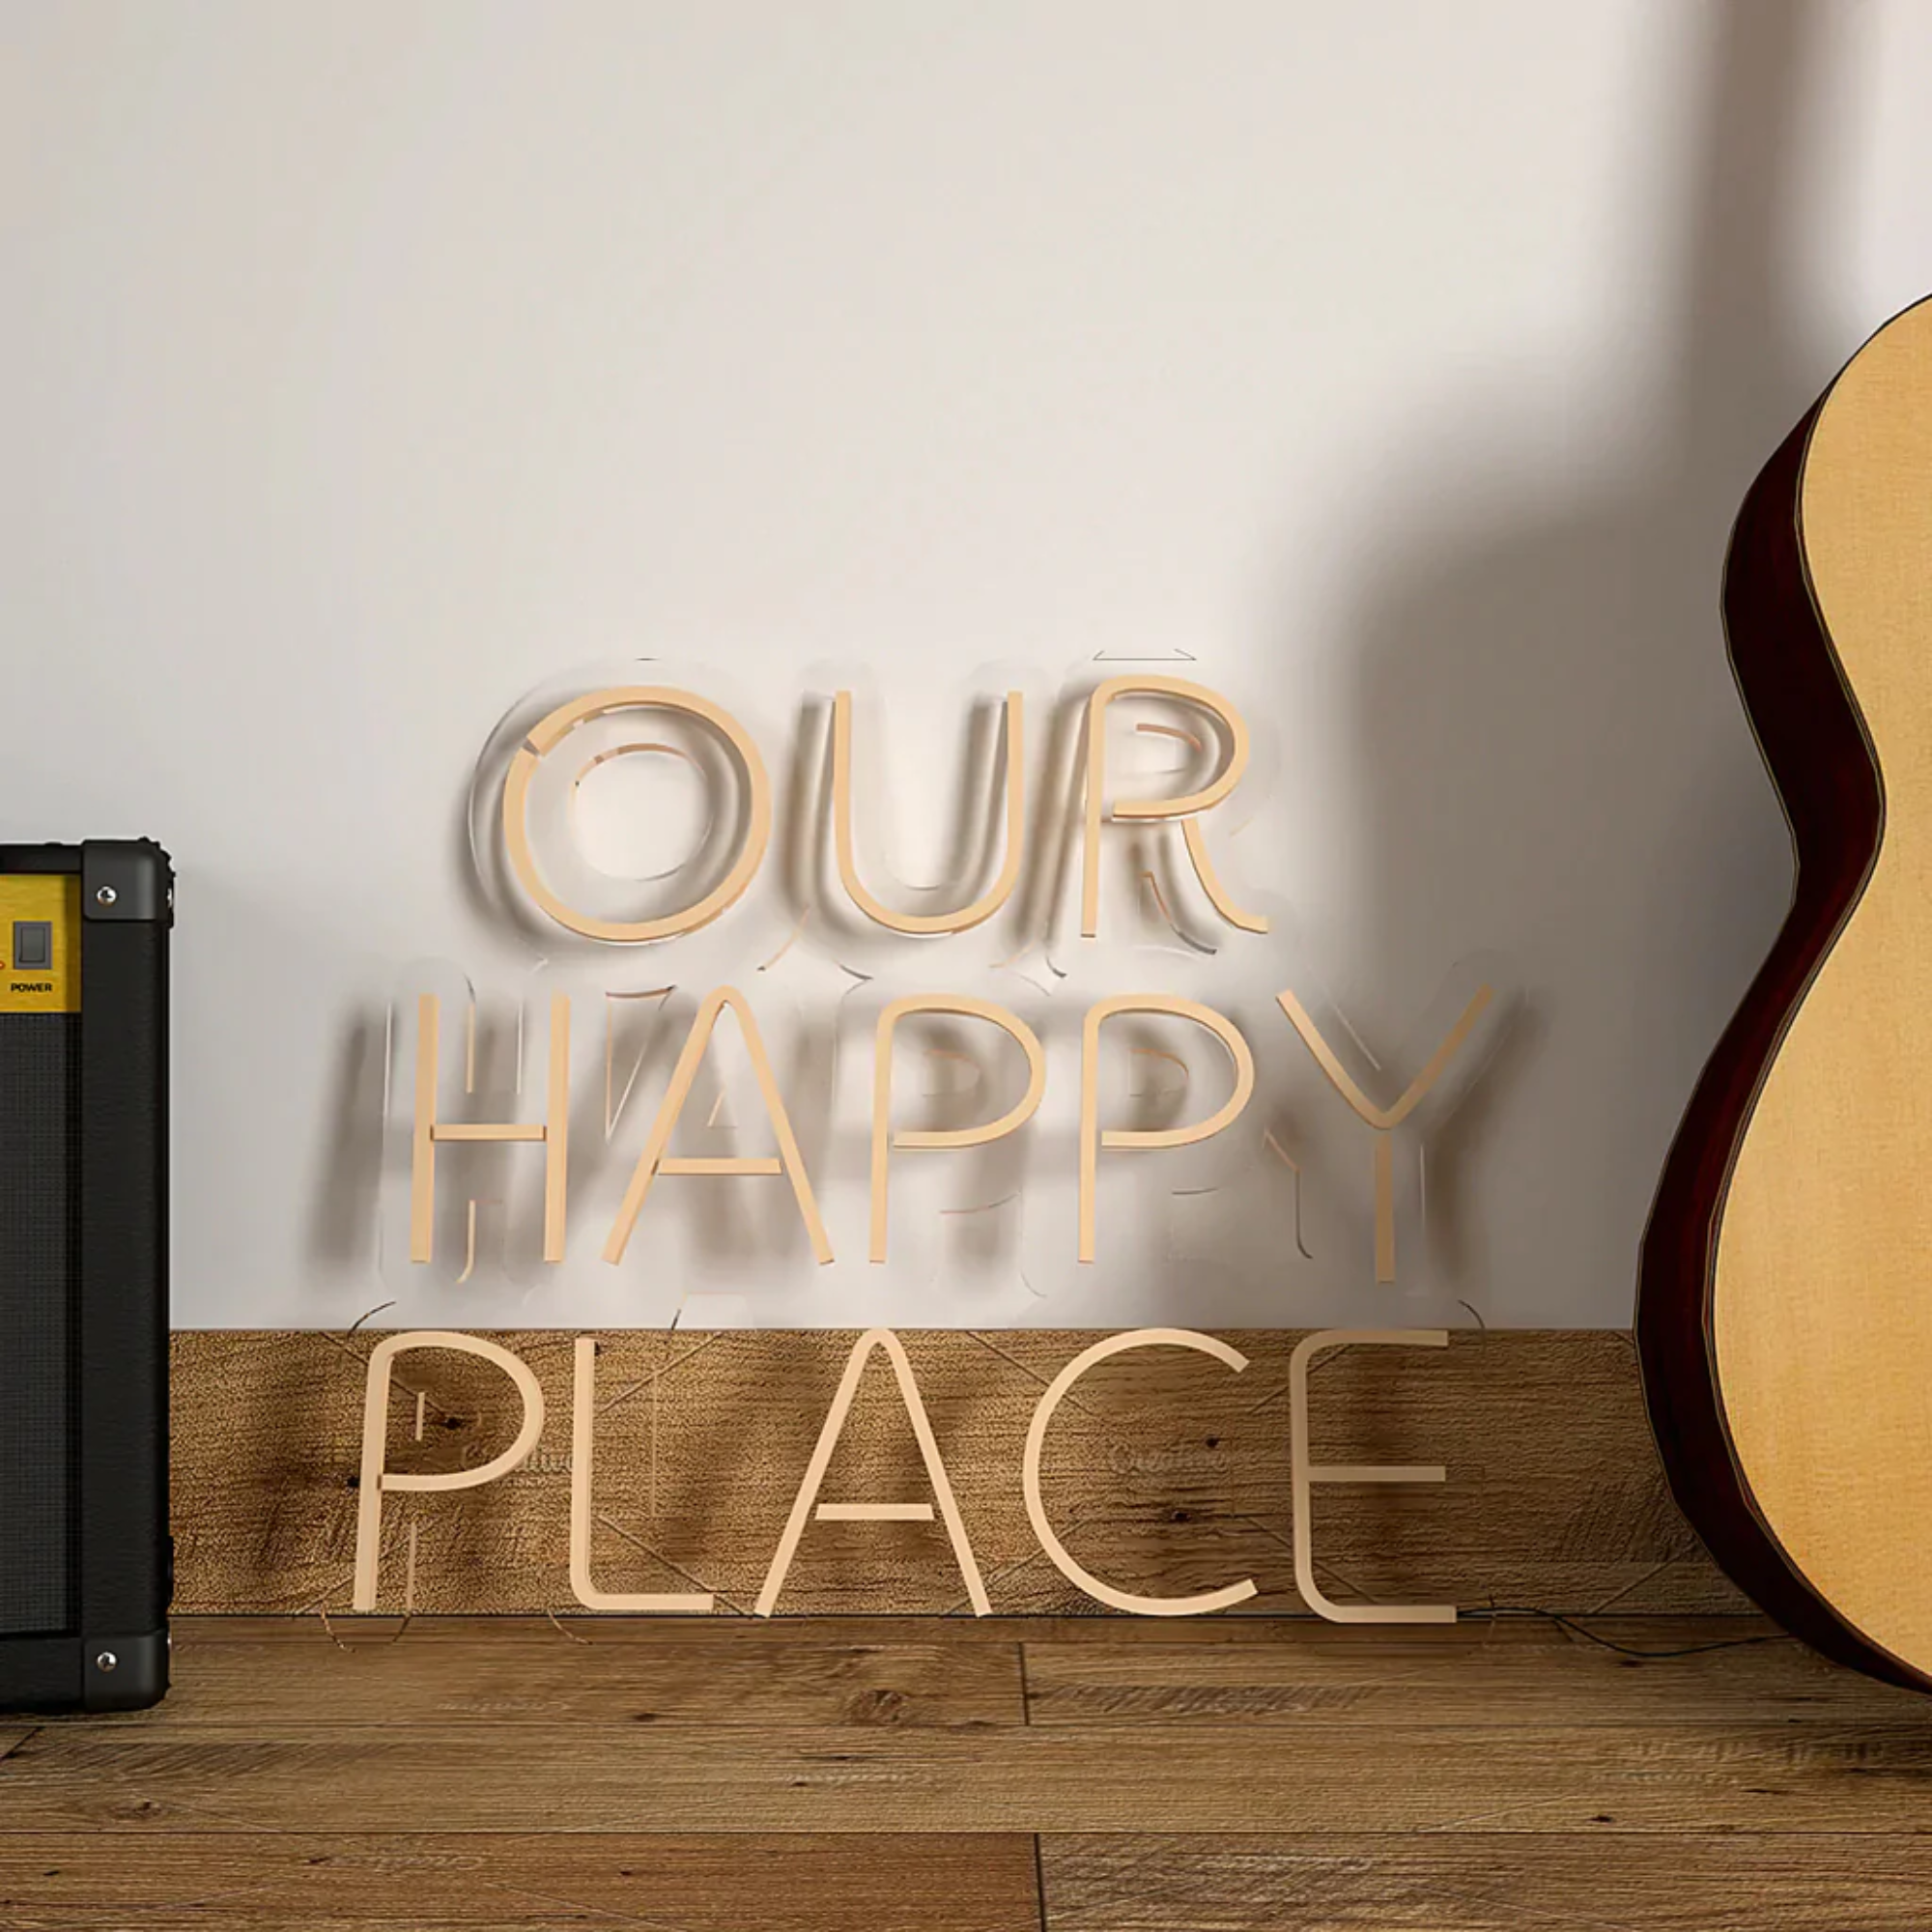 Our Happy Place Text Neon LED Light